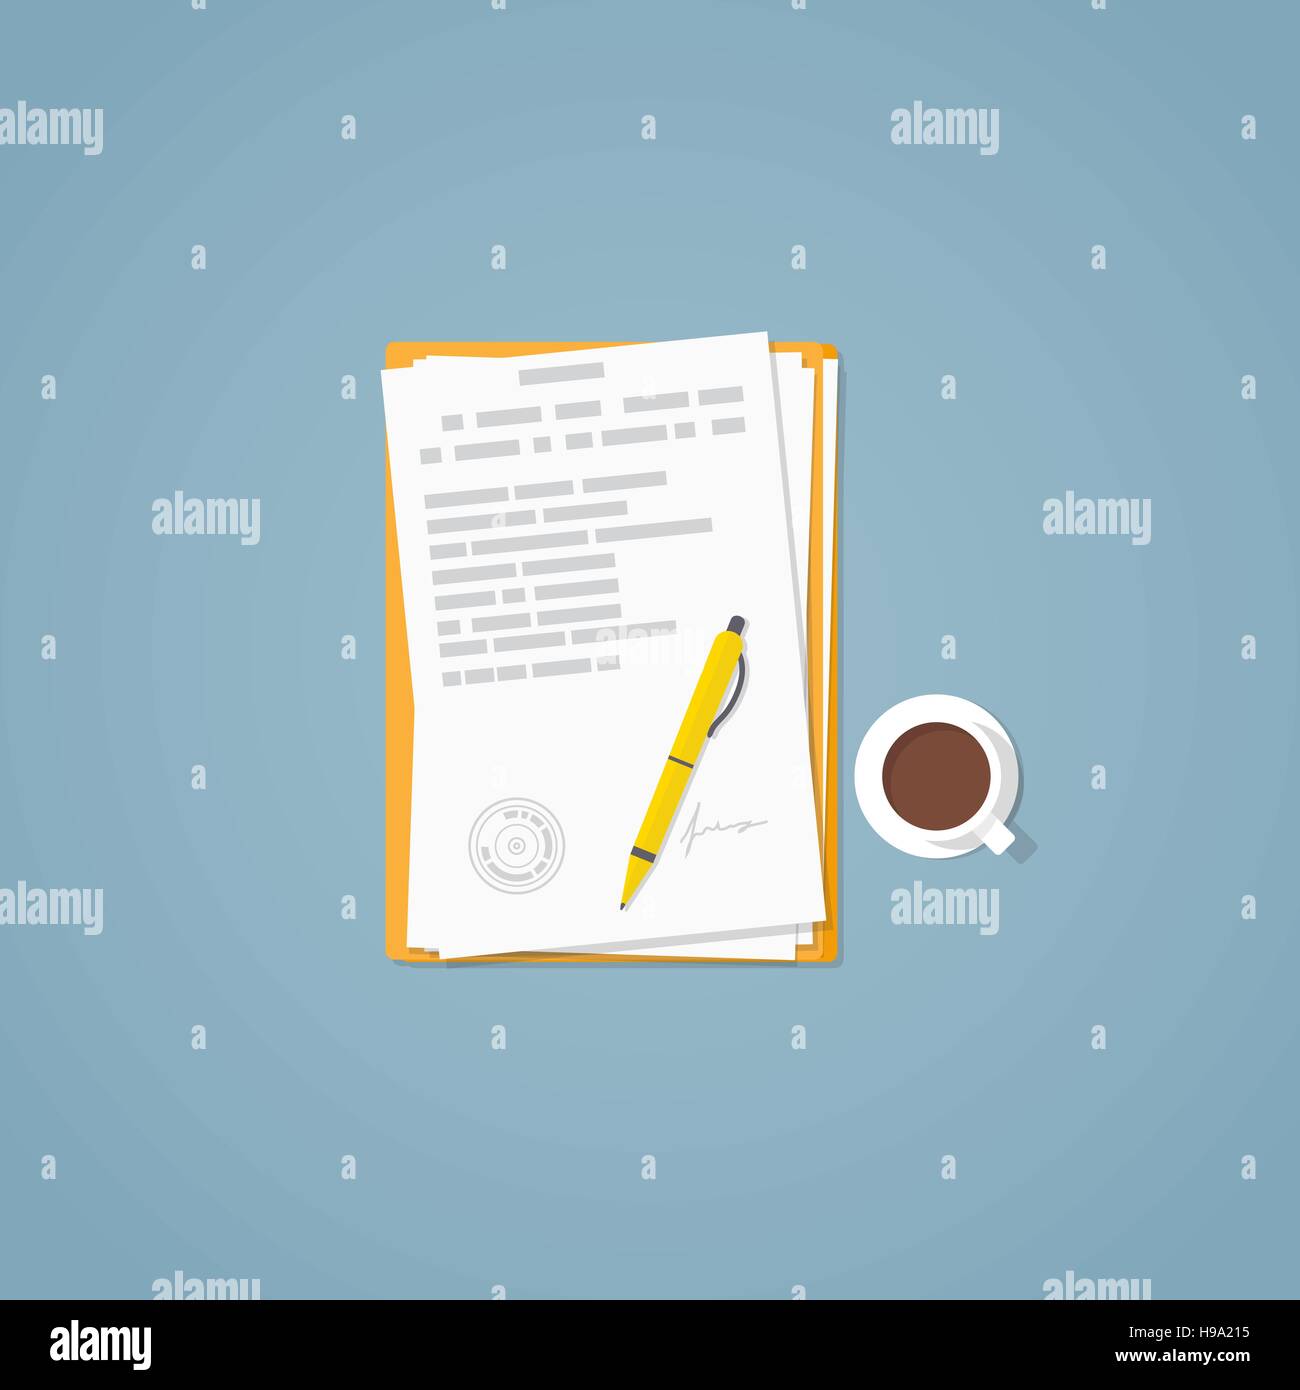 Flat illustration. Documents, golden pen, business papers. Signed agreement. Stock Vector